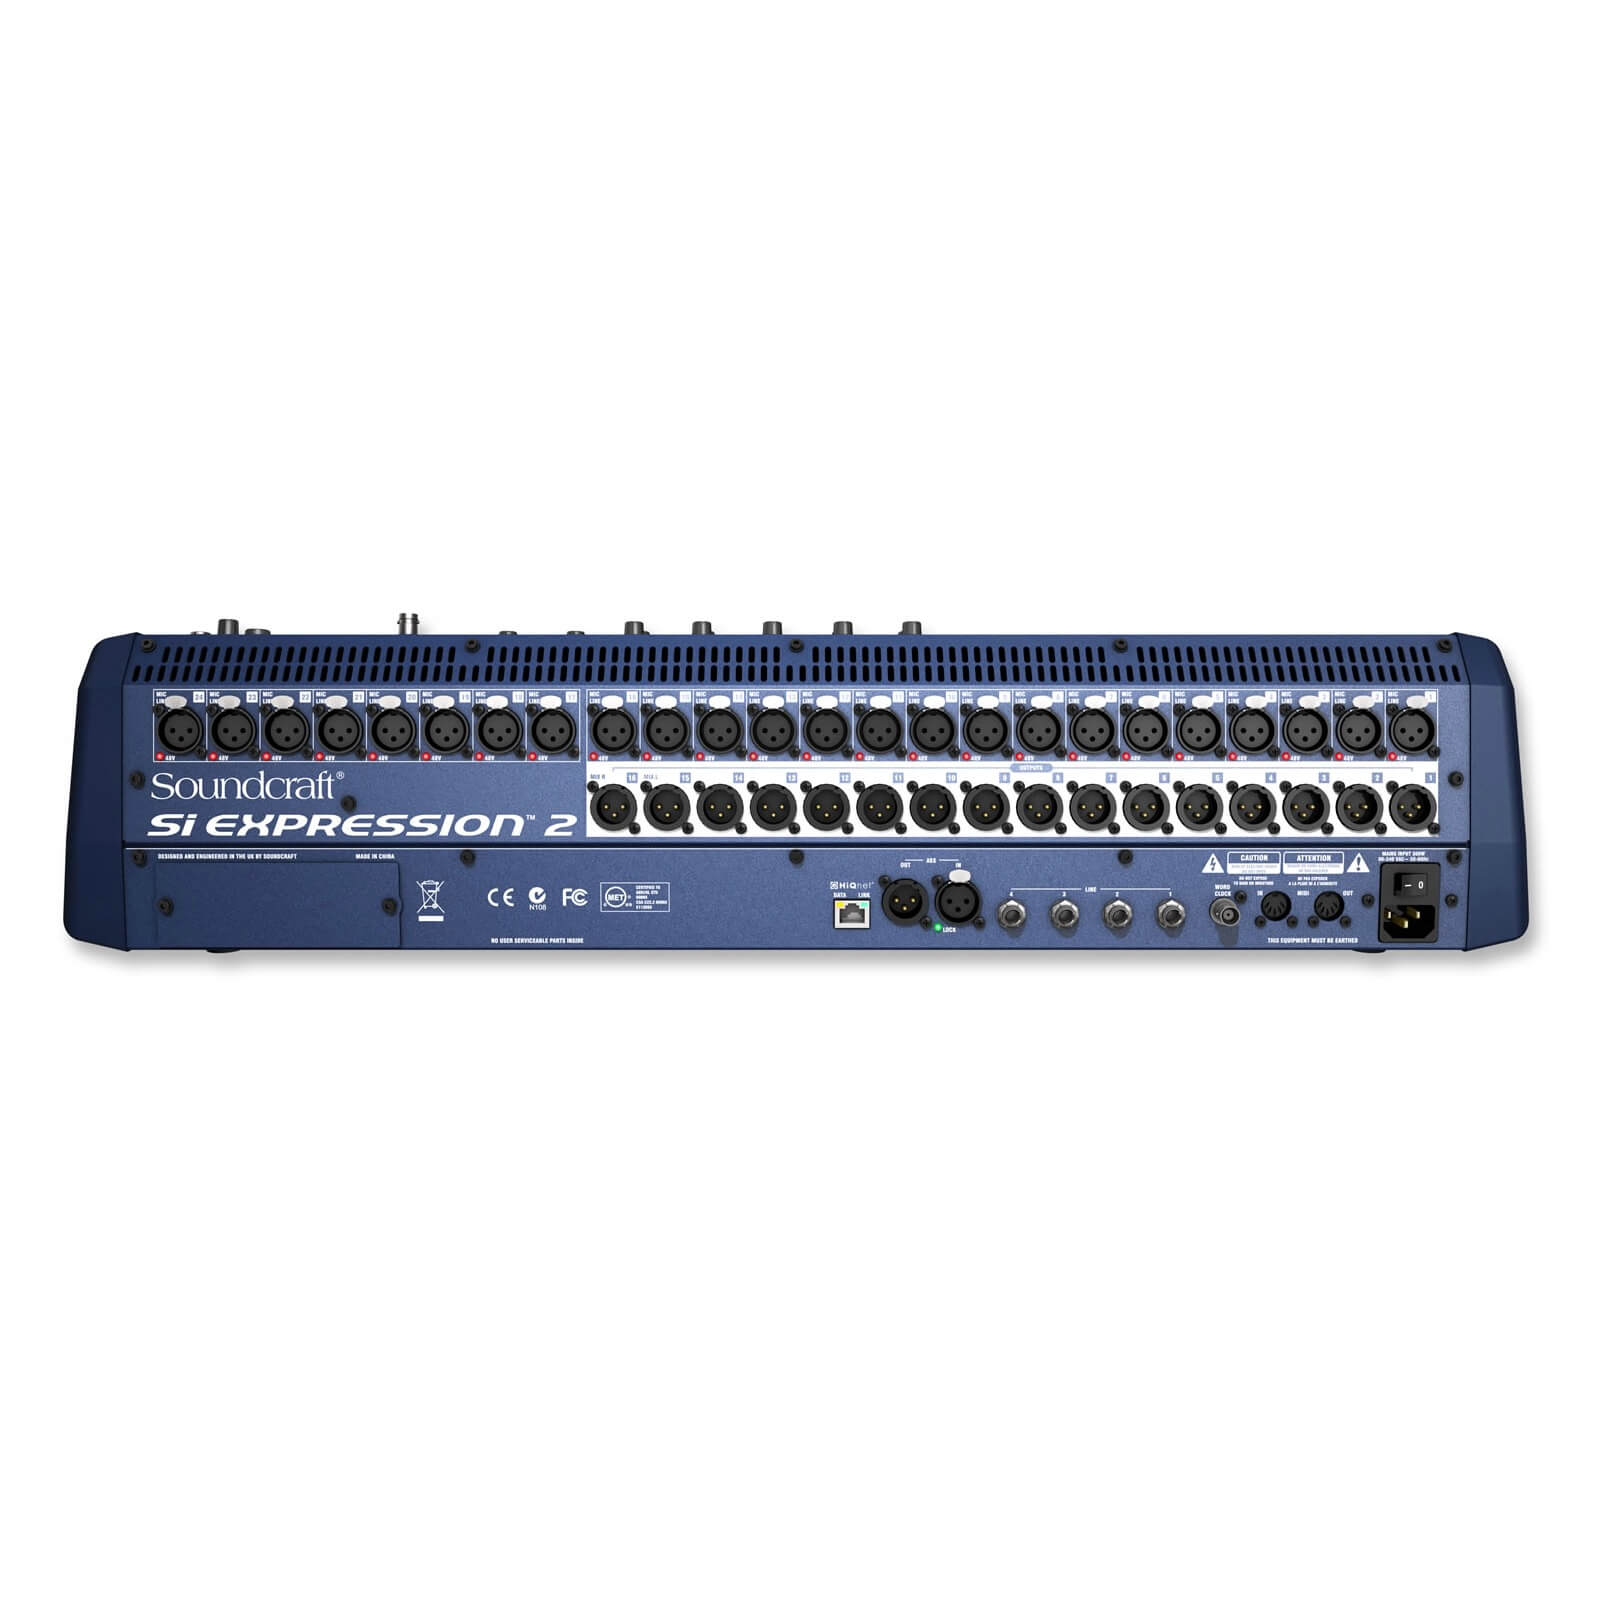 Soundcraft Si Expression 2 - 24-channel Digital Mixer, rear